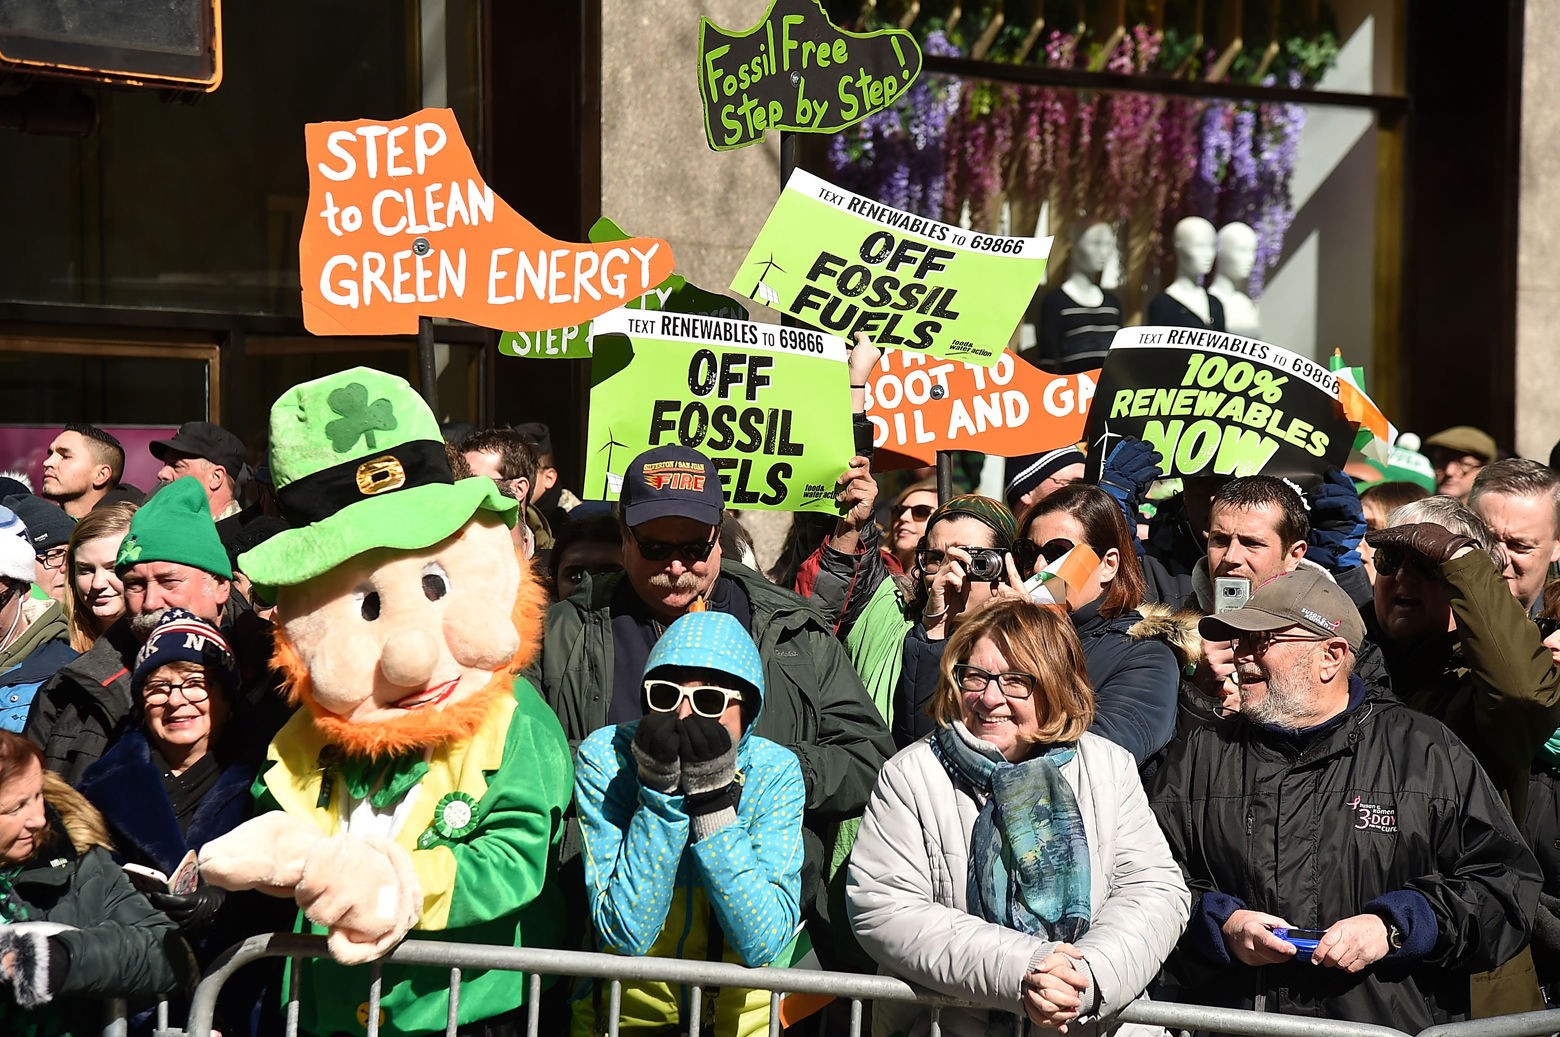 Some people held up signs of protest at the St. Patrick's Day parade in New York. (Theo Wargo/Getty Images)